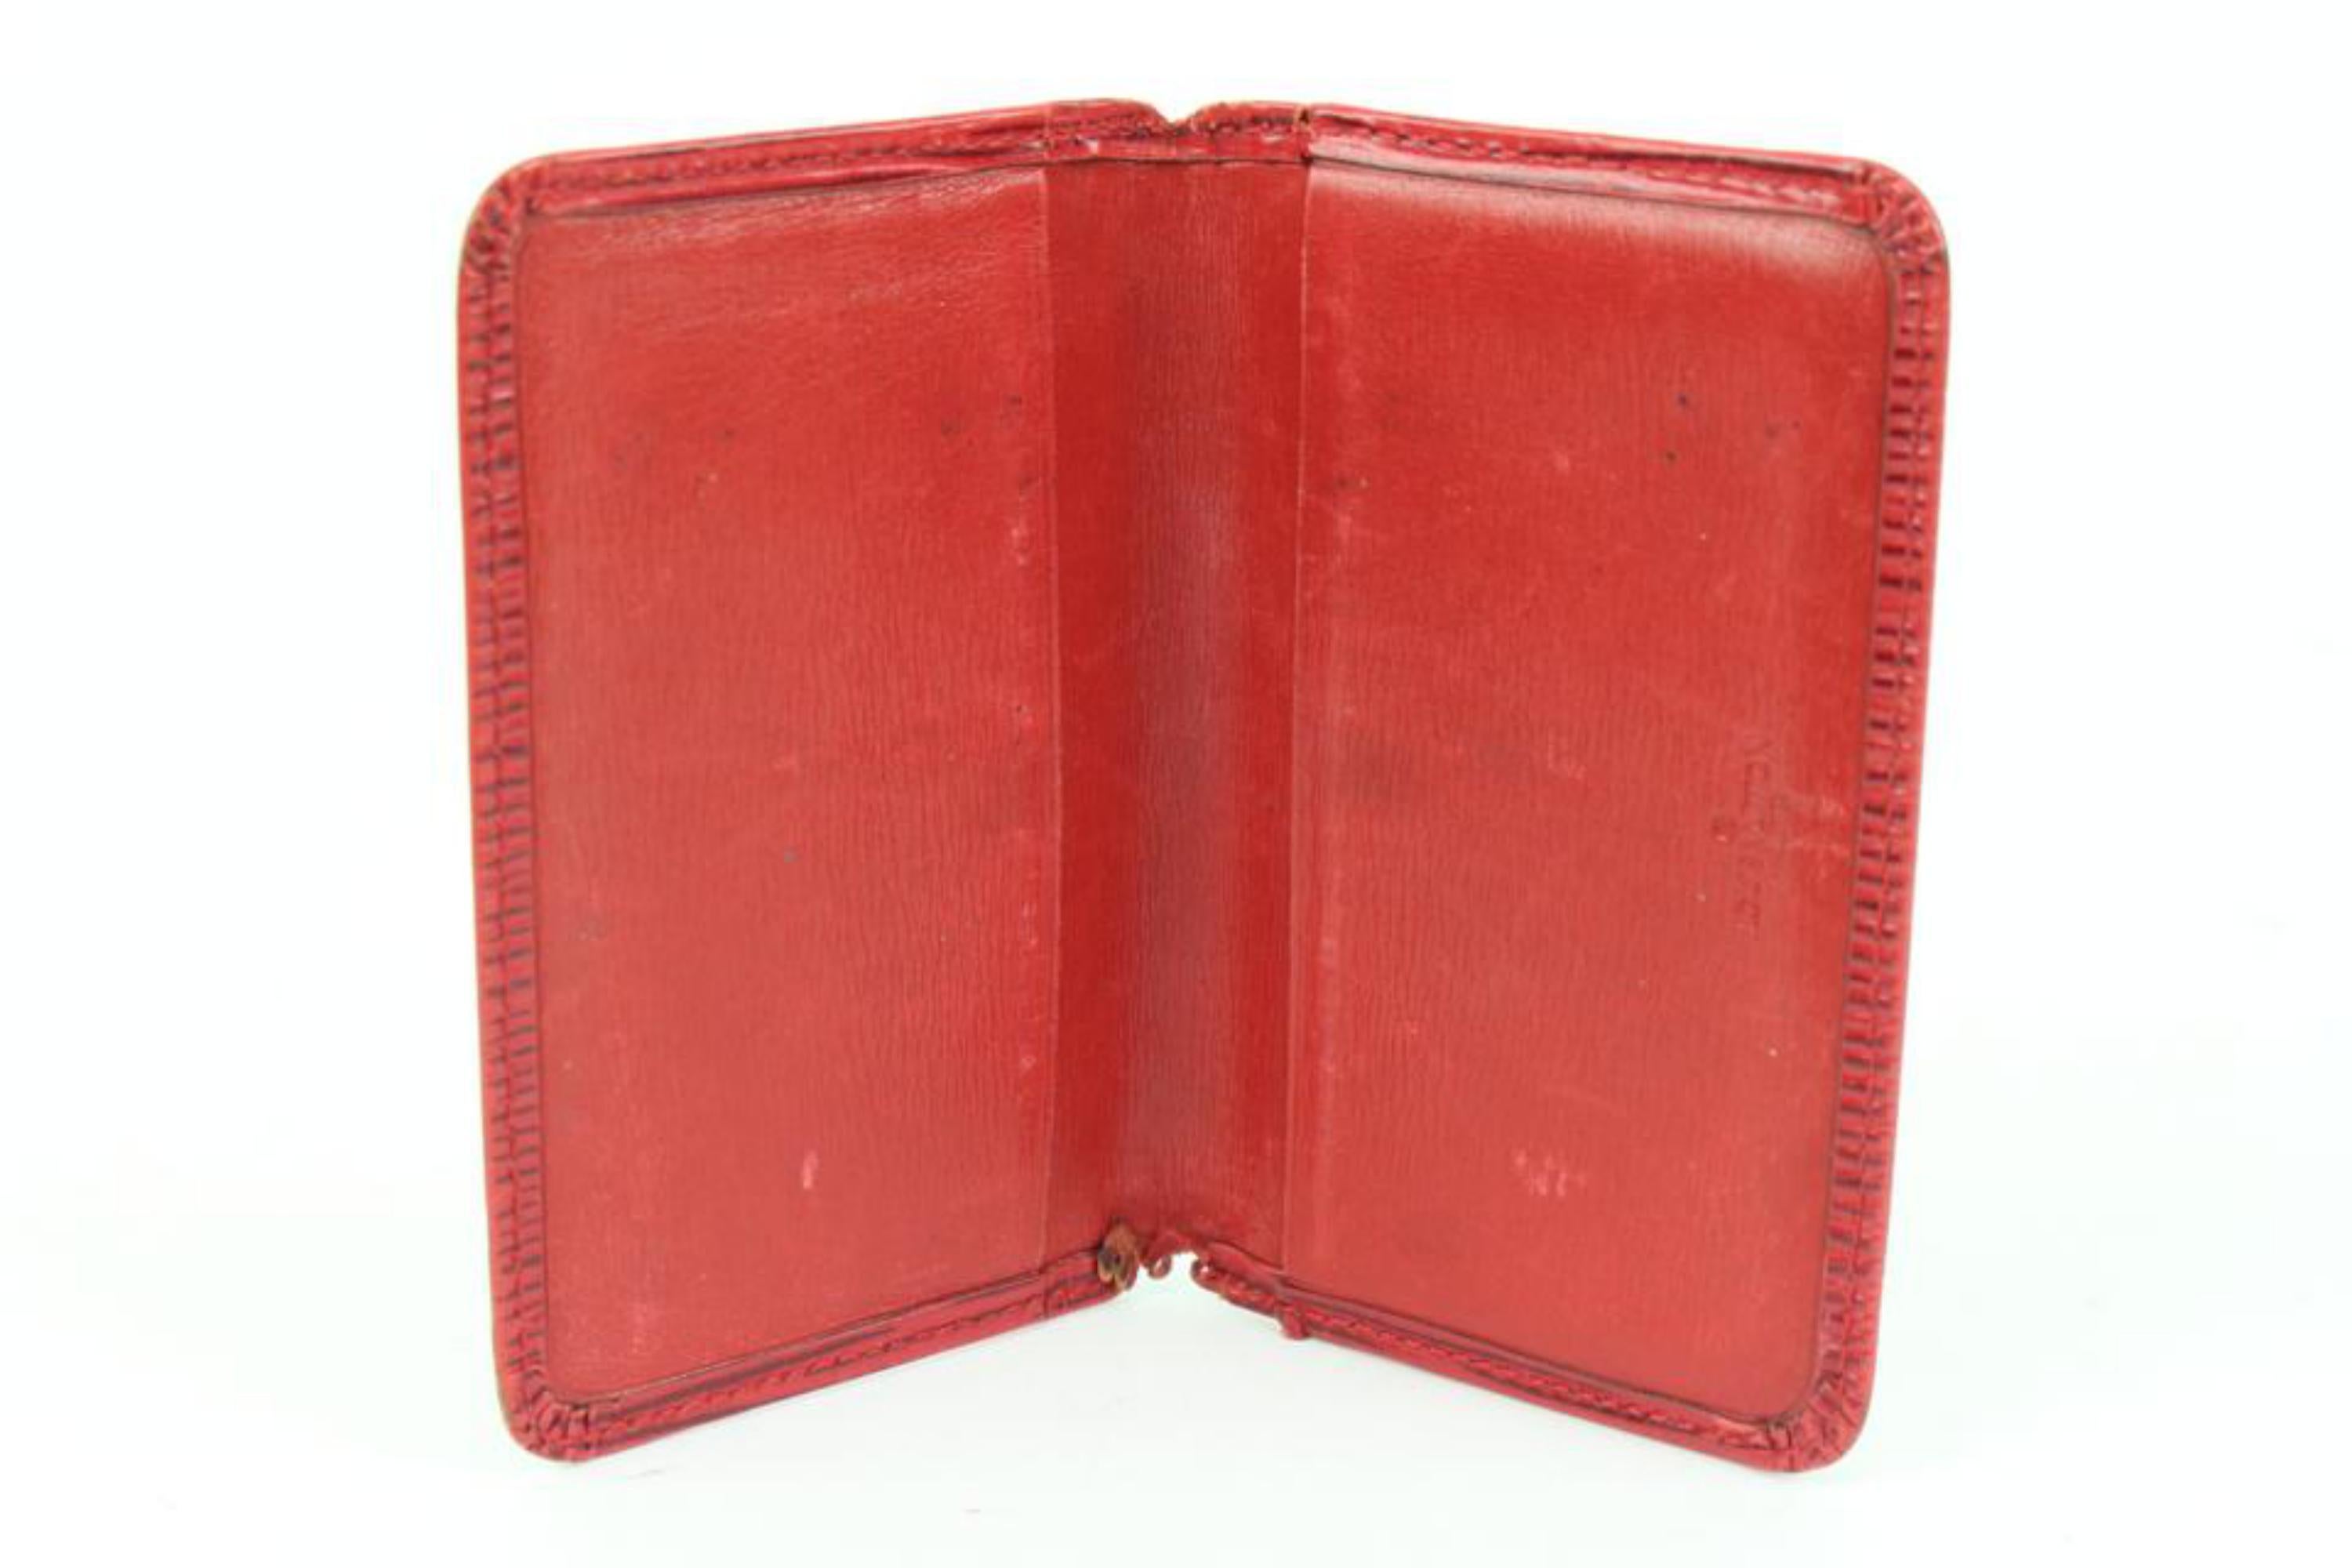 Louis Vuitton Red Epi Leather Porte Cartes Card Holder Wallet Insert s330lv30 In Fair Condition For Sale In Dix hills, NY